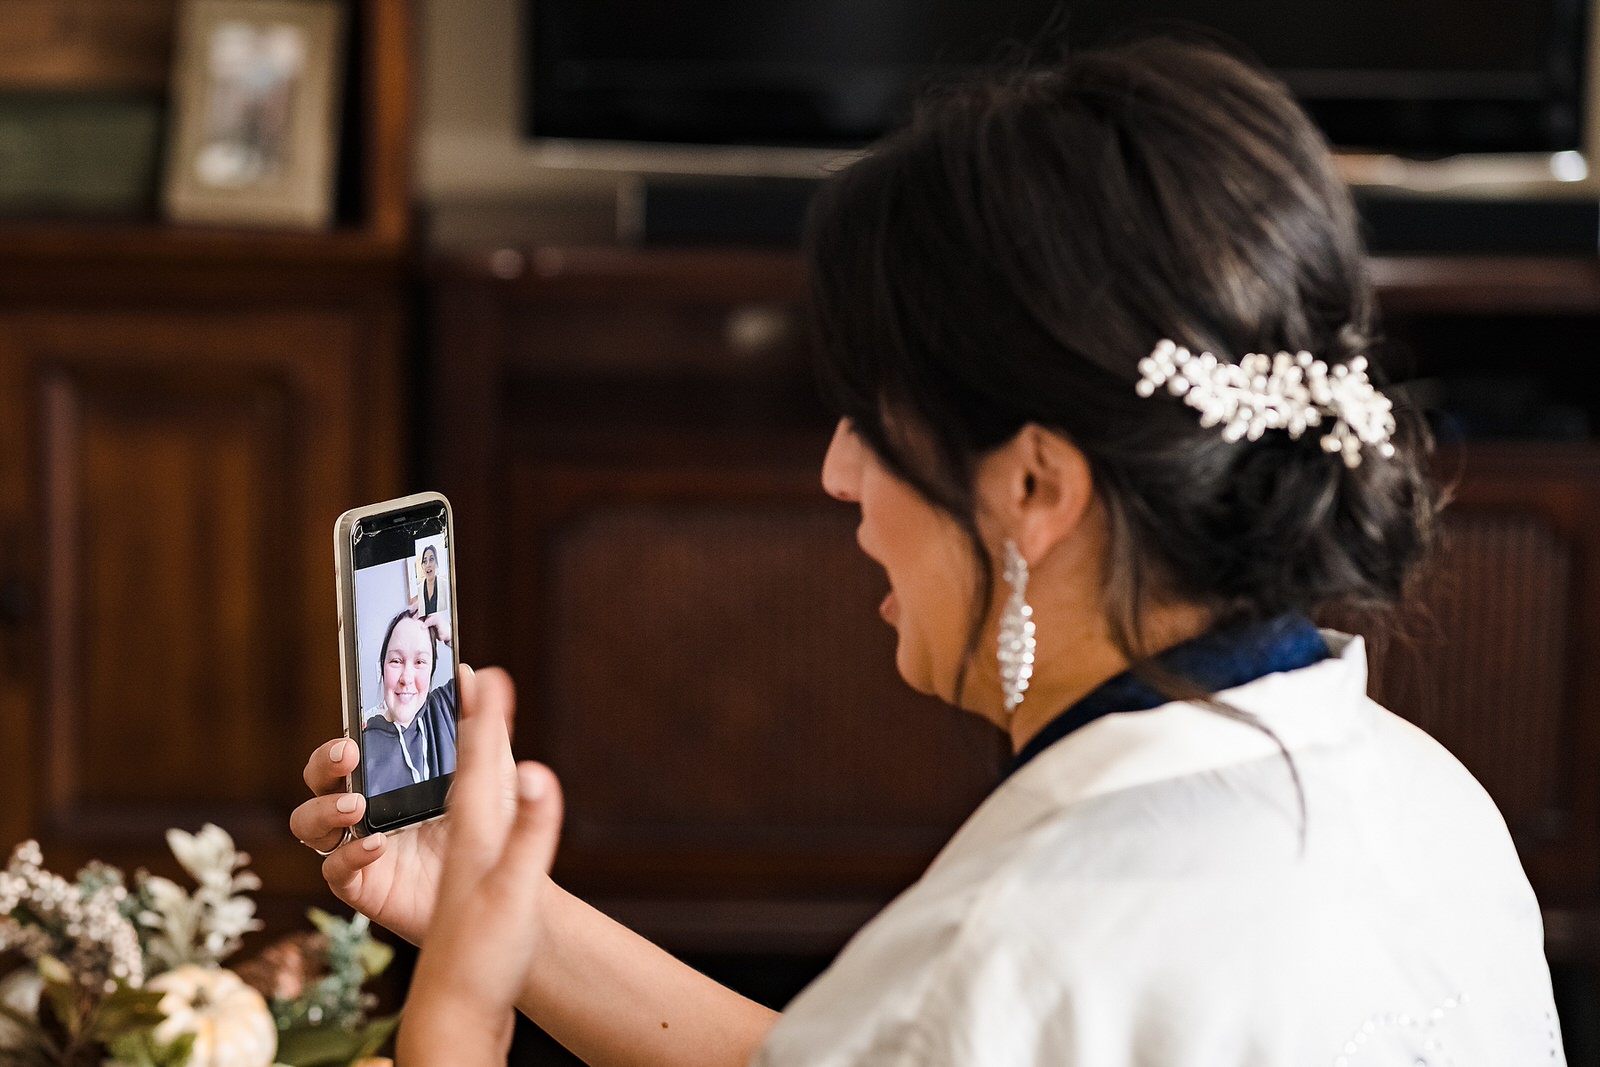 Because of Covid, the bride's best friend couldn't come to the wedding, so they facetimed while she got ready